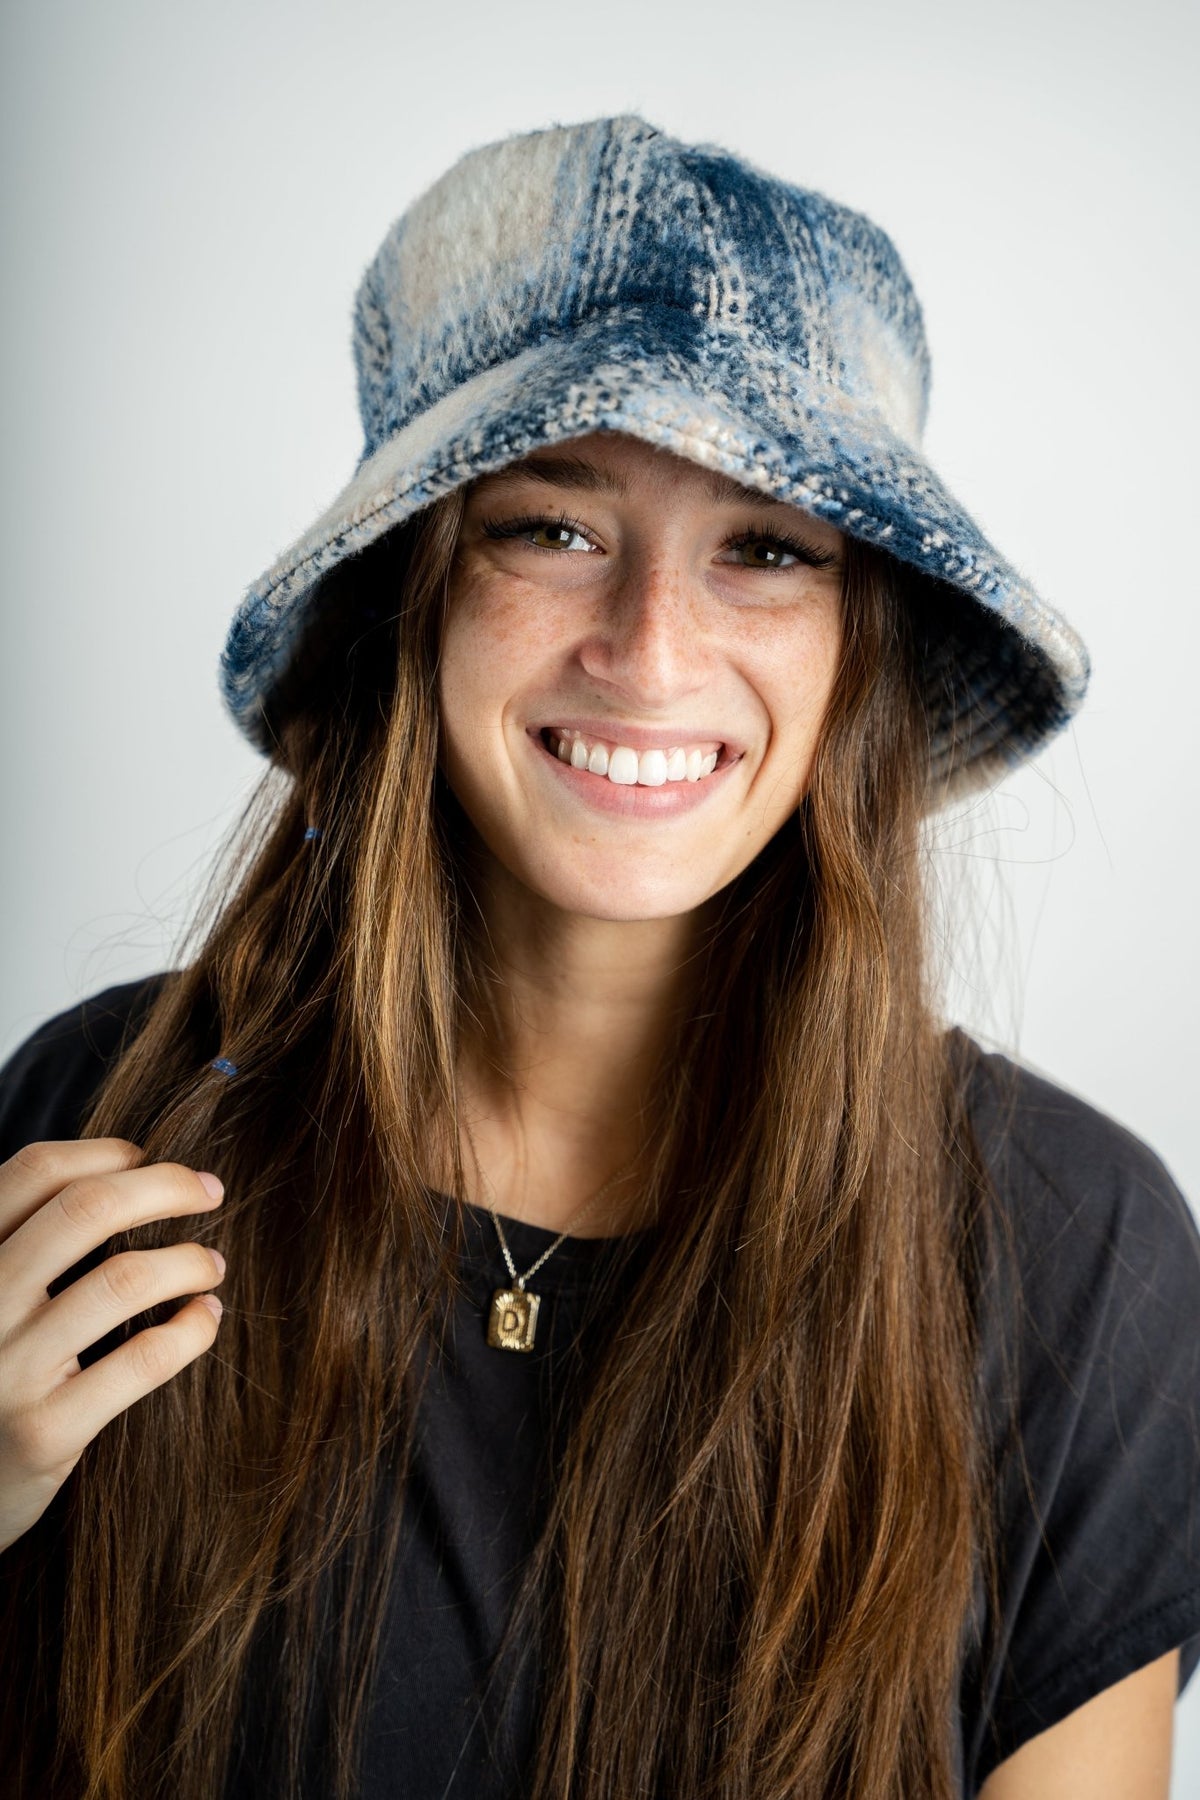 Plaid fuzzy bucket hat navy - Trendy Hats at Lush Fashion Lounge Boutique in Oklahoma City